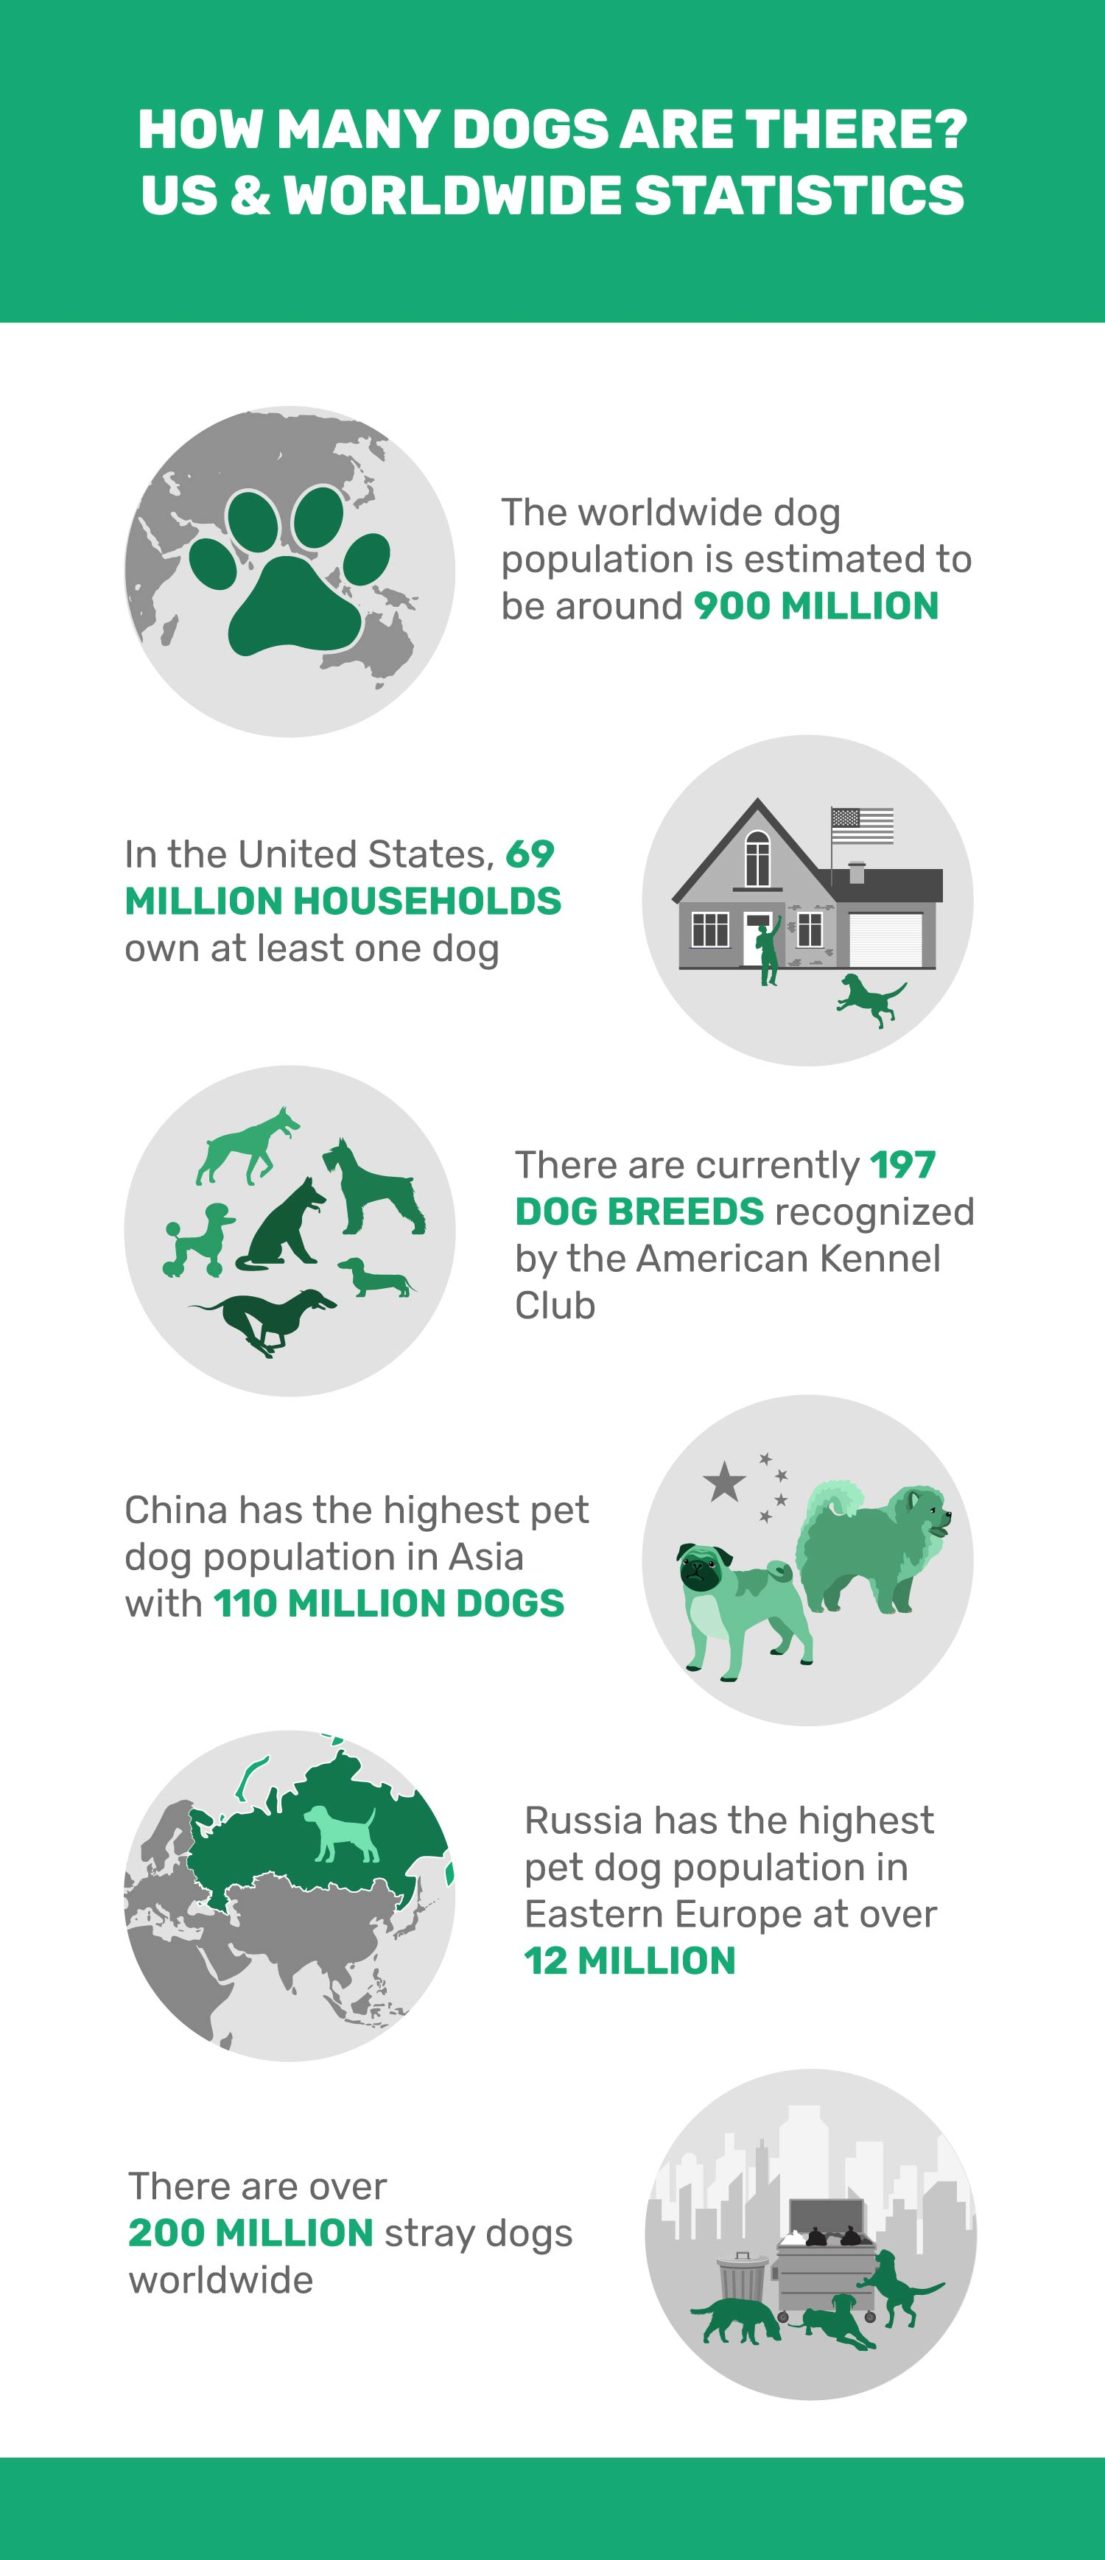 HOW-MANY-DOGS-ARE-THERE-US-&-WORLDWIDE-STATISTICS